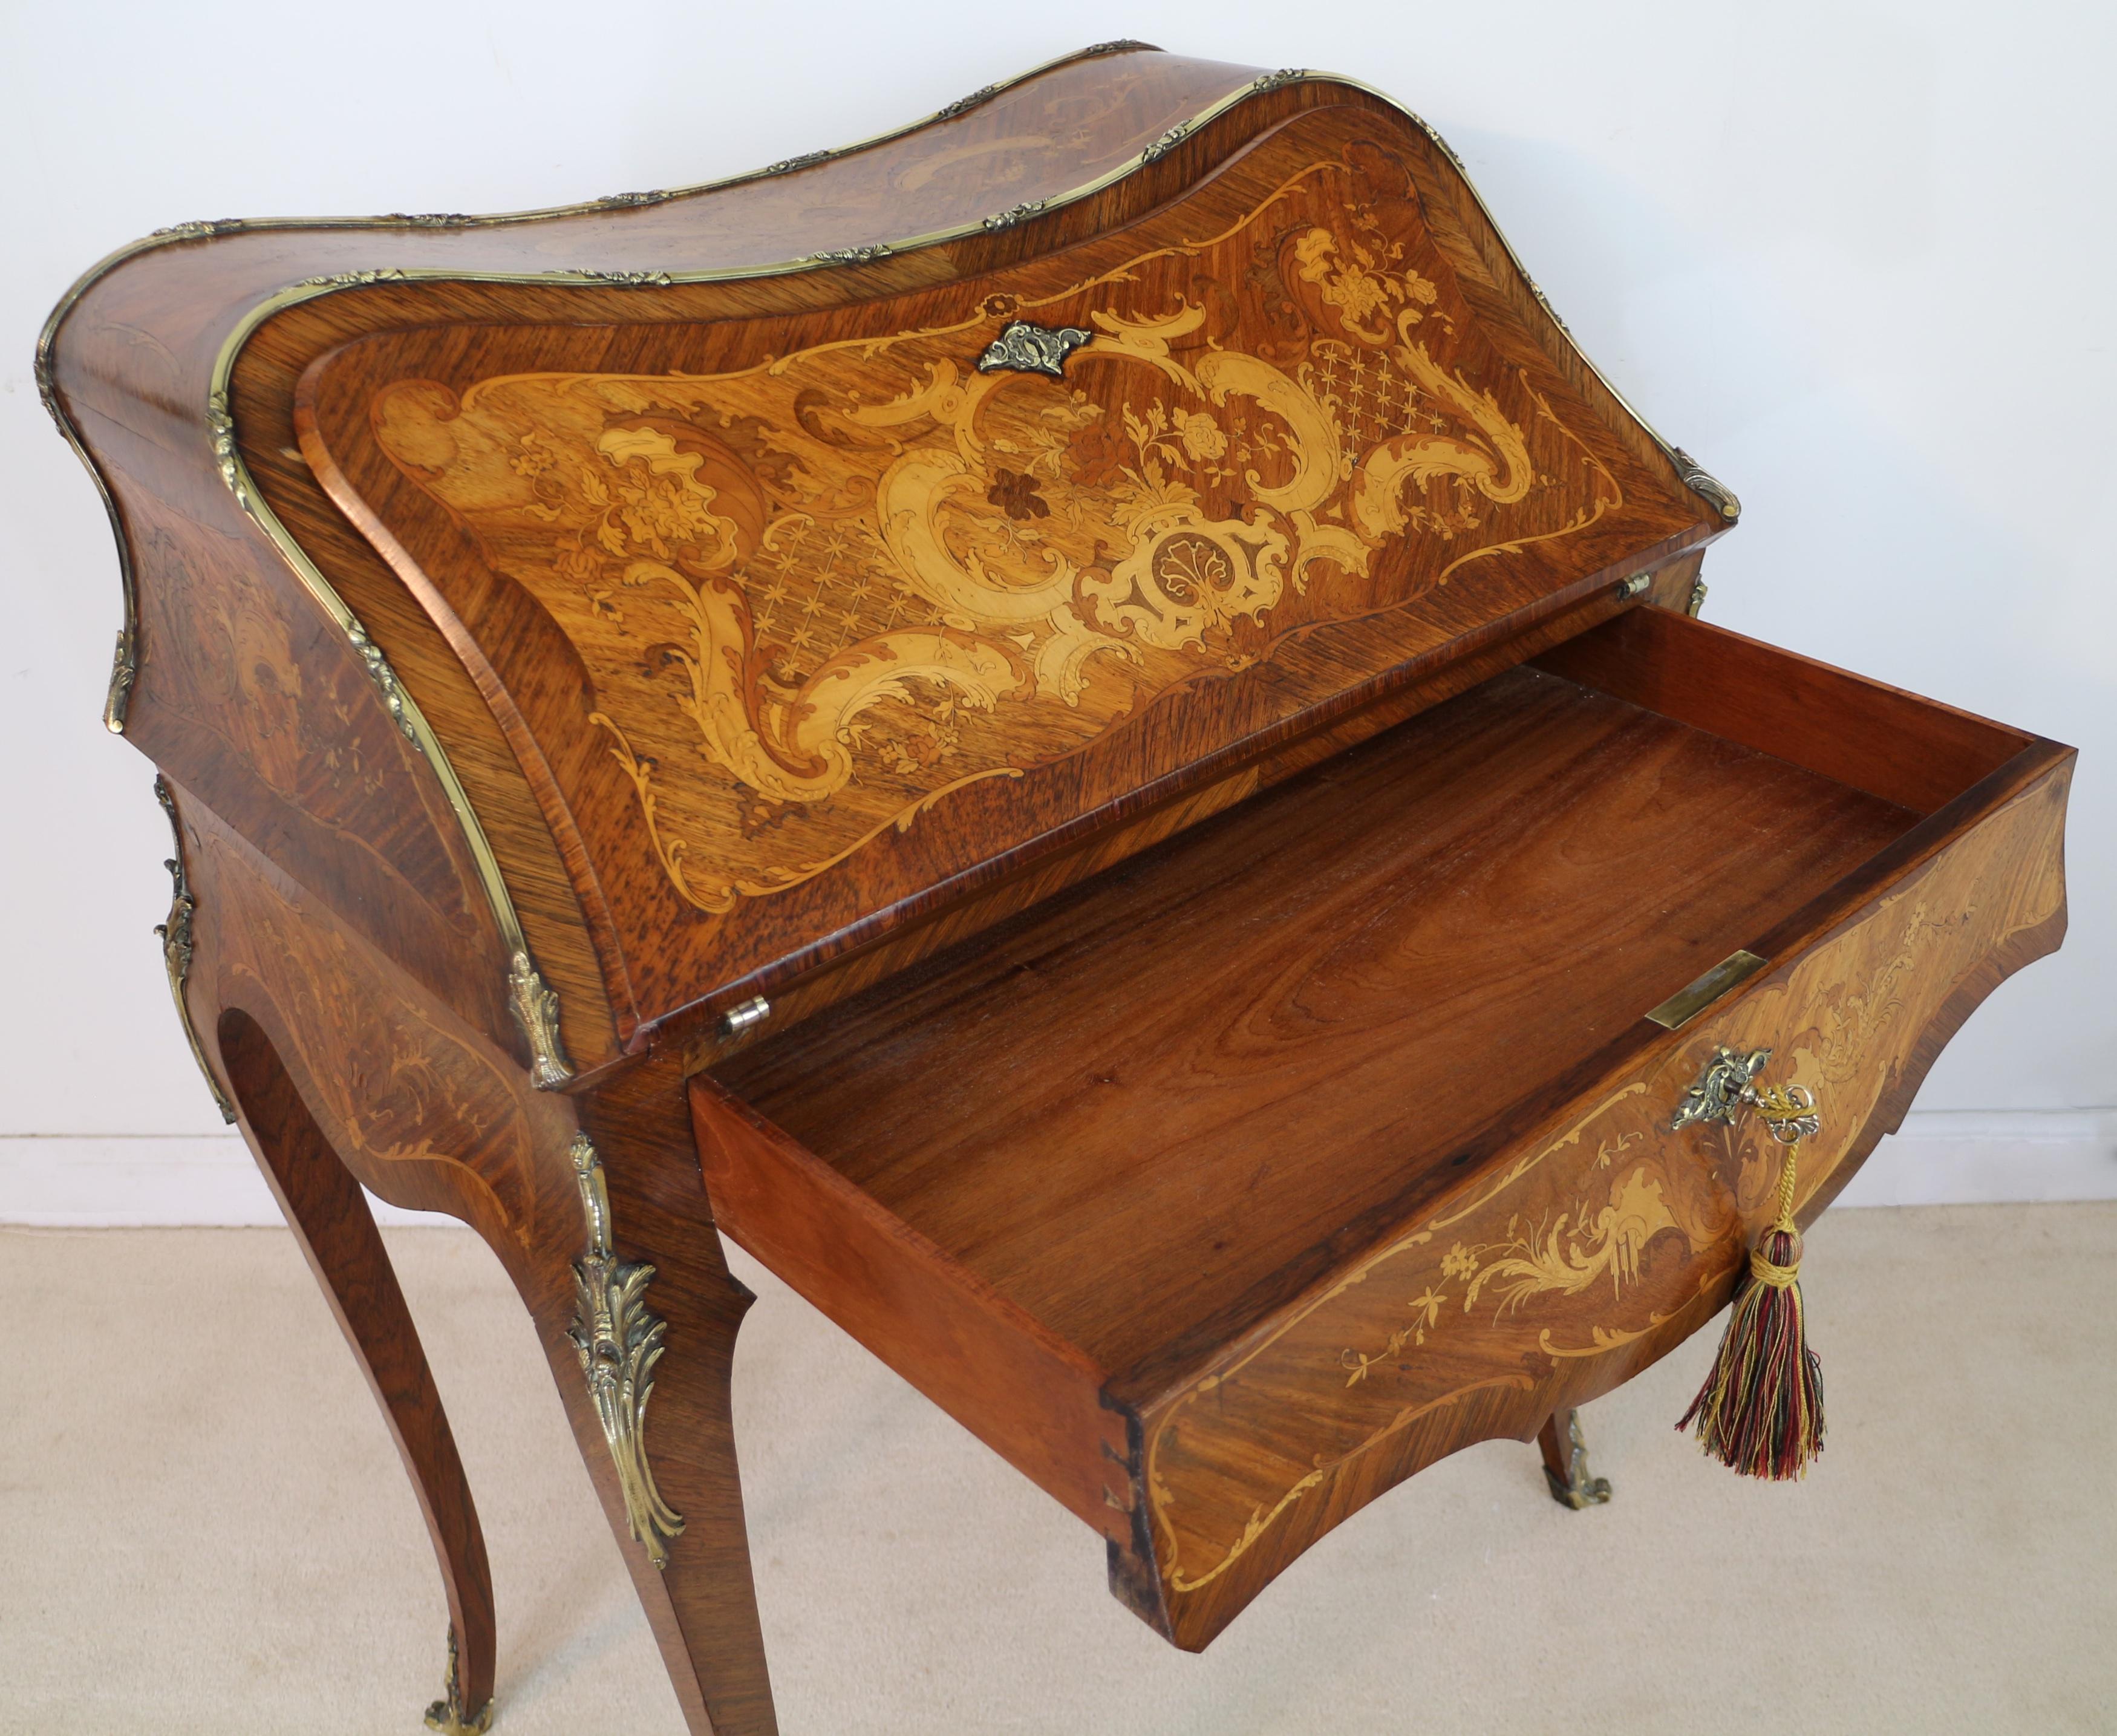 Antique French Louis XV Style Kingwood and Marquetry Bureau de Dame For Sale 11